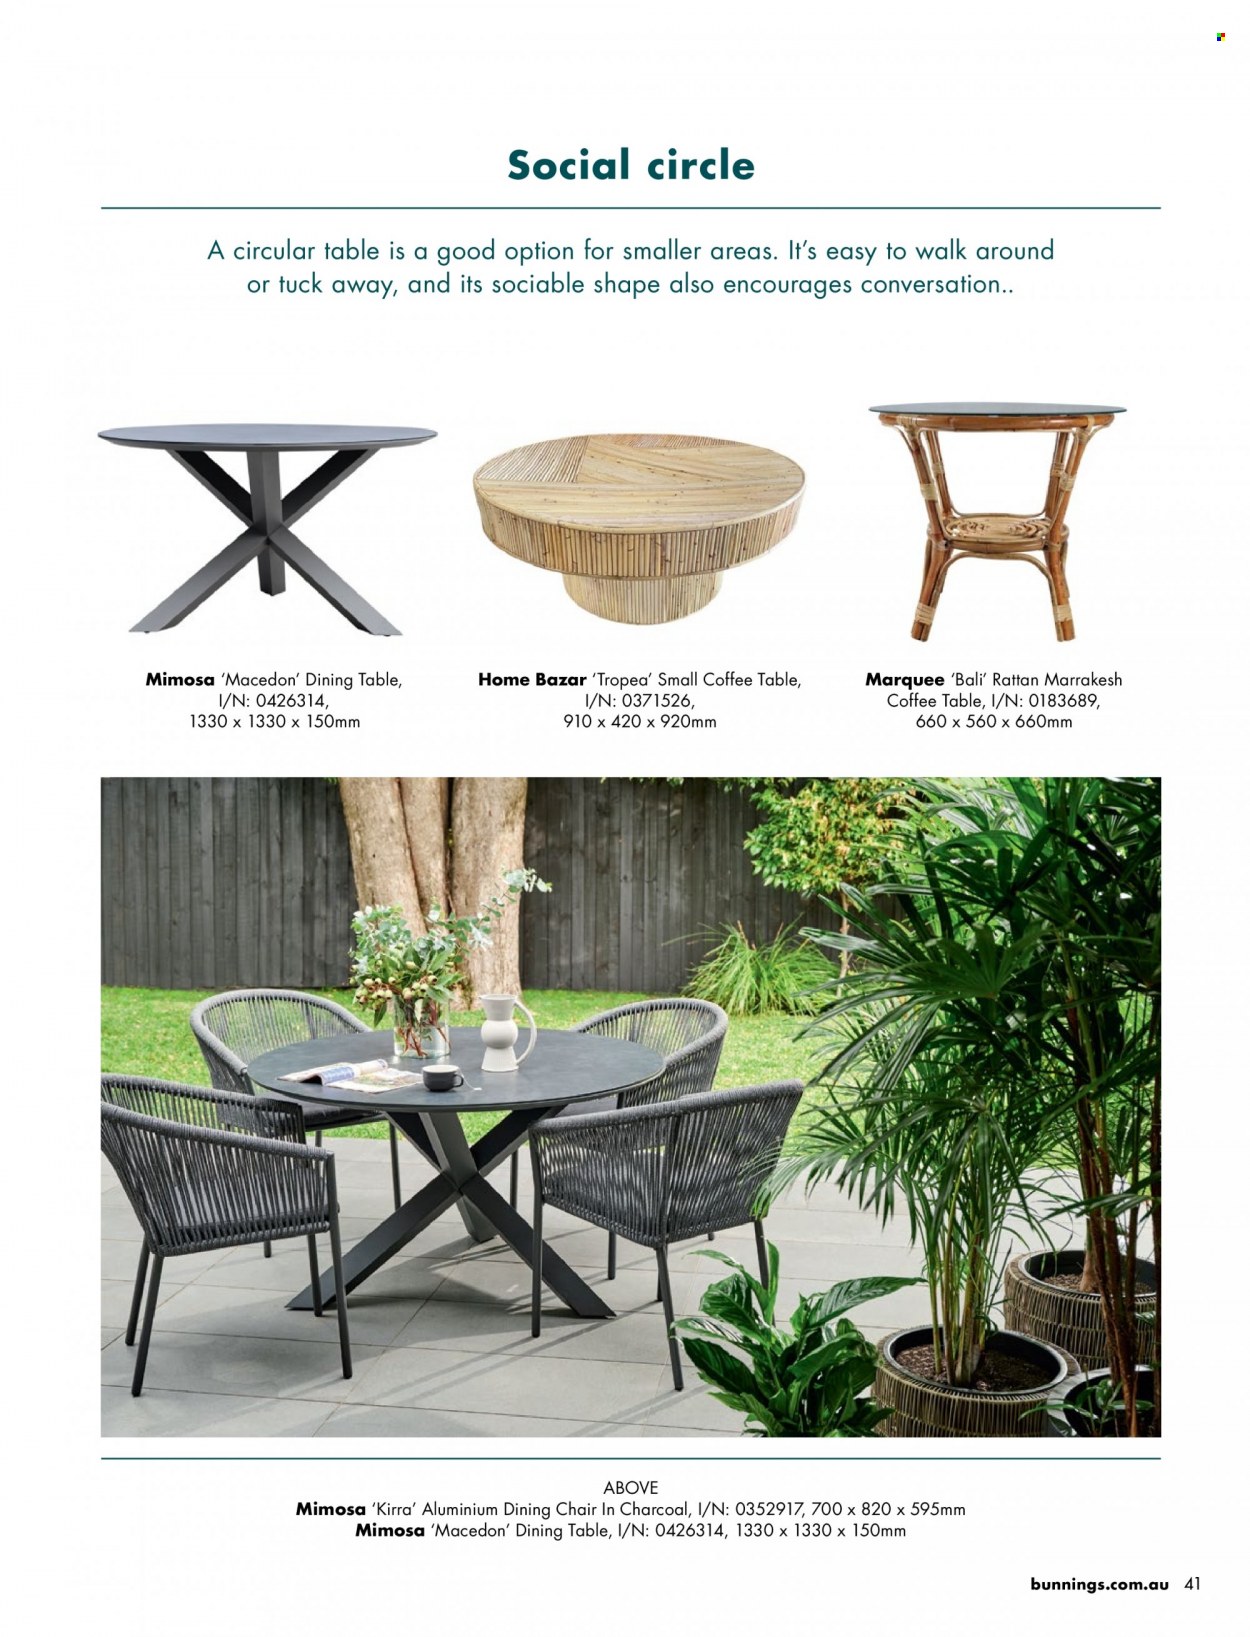 thumbnail - Bunnings Warehouse Catalogue - Sales products - dining table, table, dining chair, chair, coffee table. Page 41.